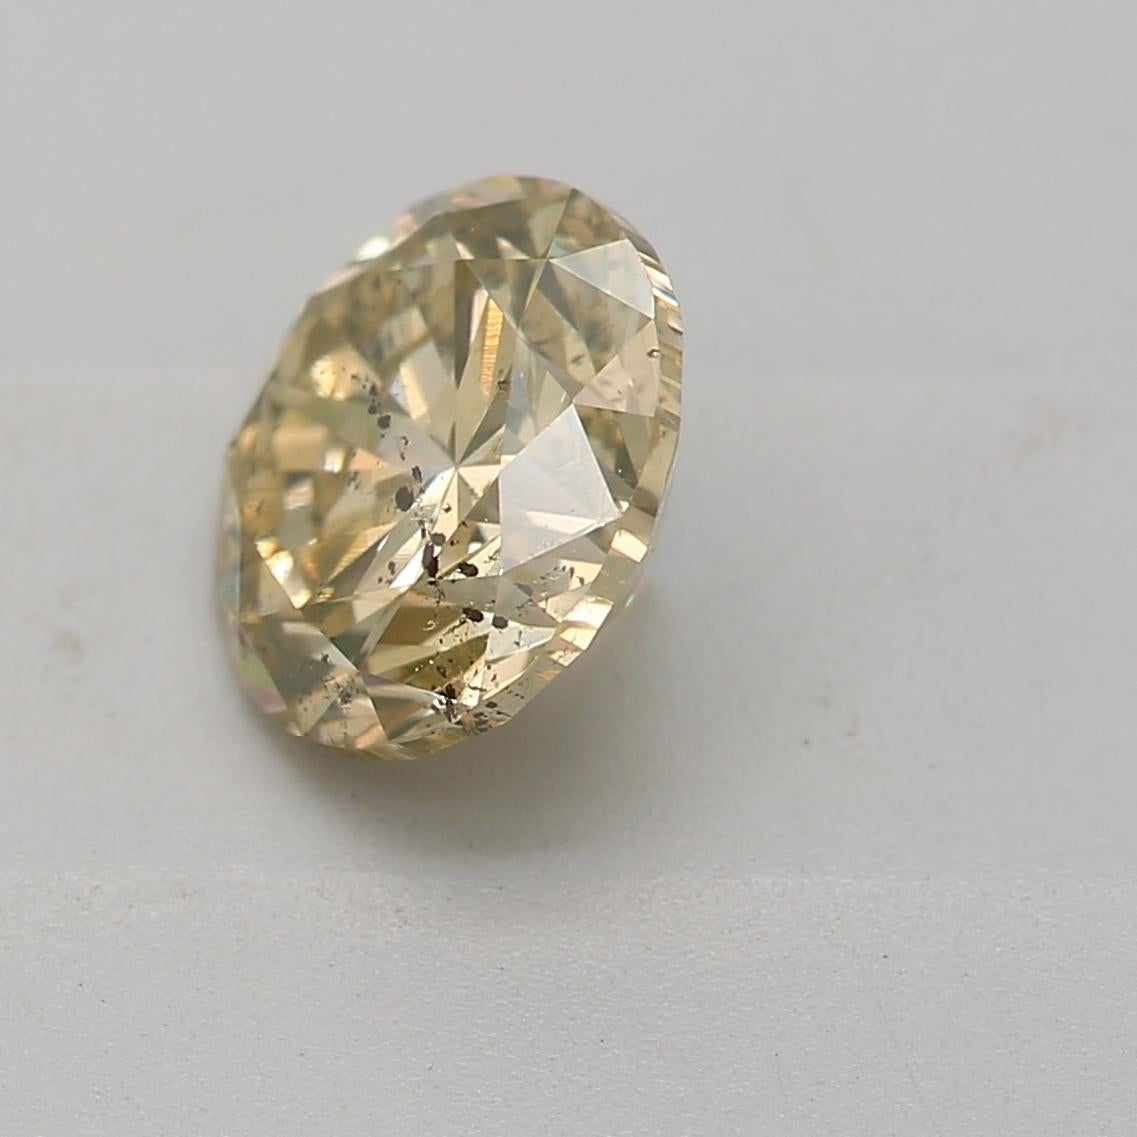 Round Cut 1.03-CARAT, FANCY BROWNISH YELLOW, CUT DIAMOND I1 Clarity GIA Certified For Sale